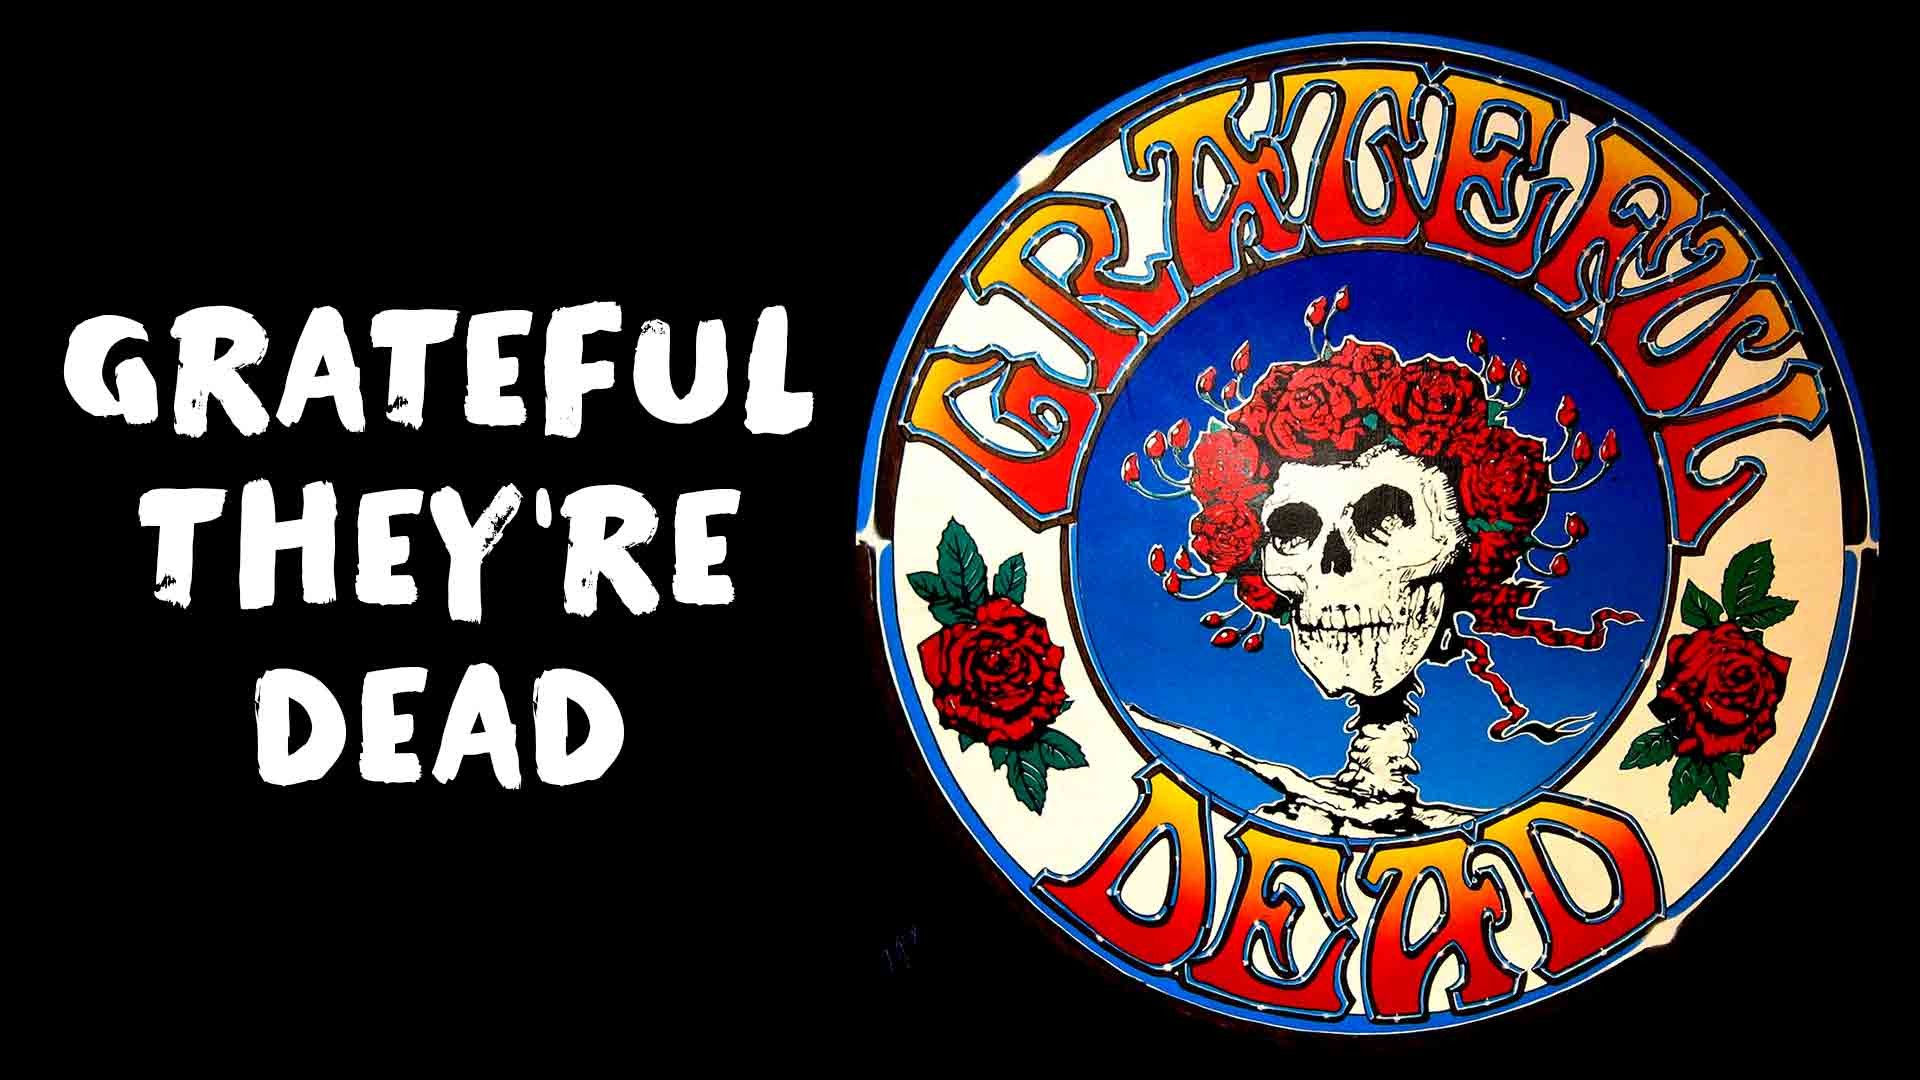 1920x1080 5 Reasons We're Grateful They're Dead